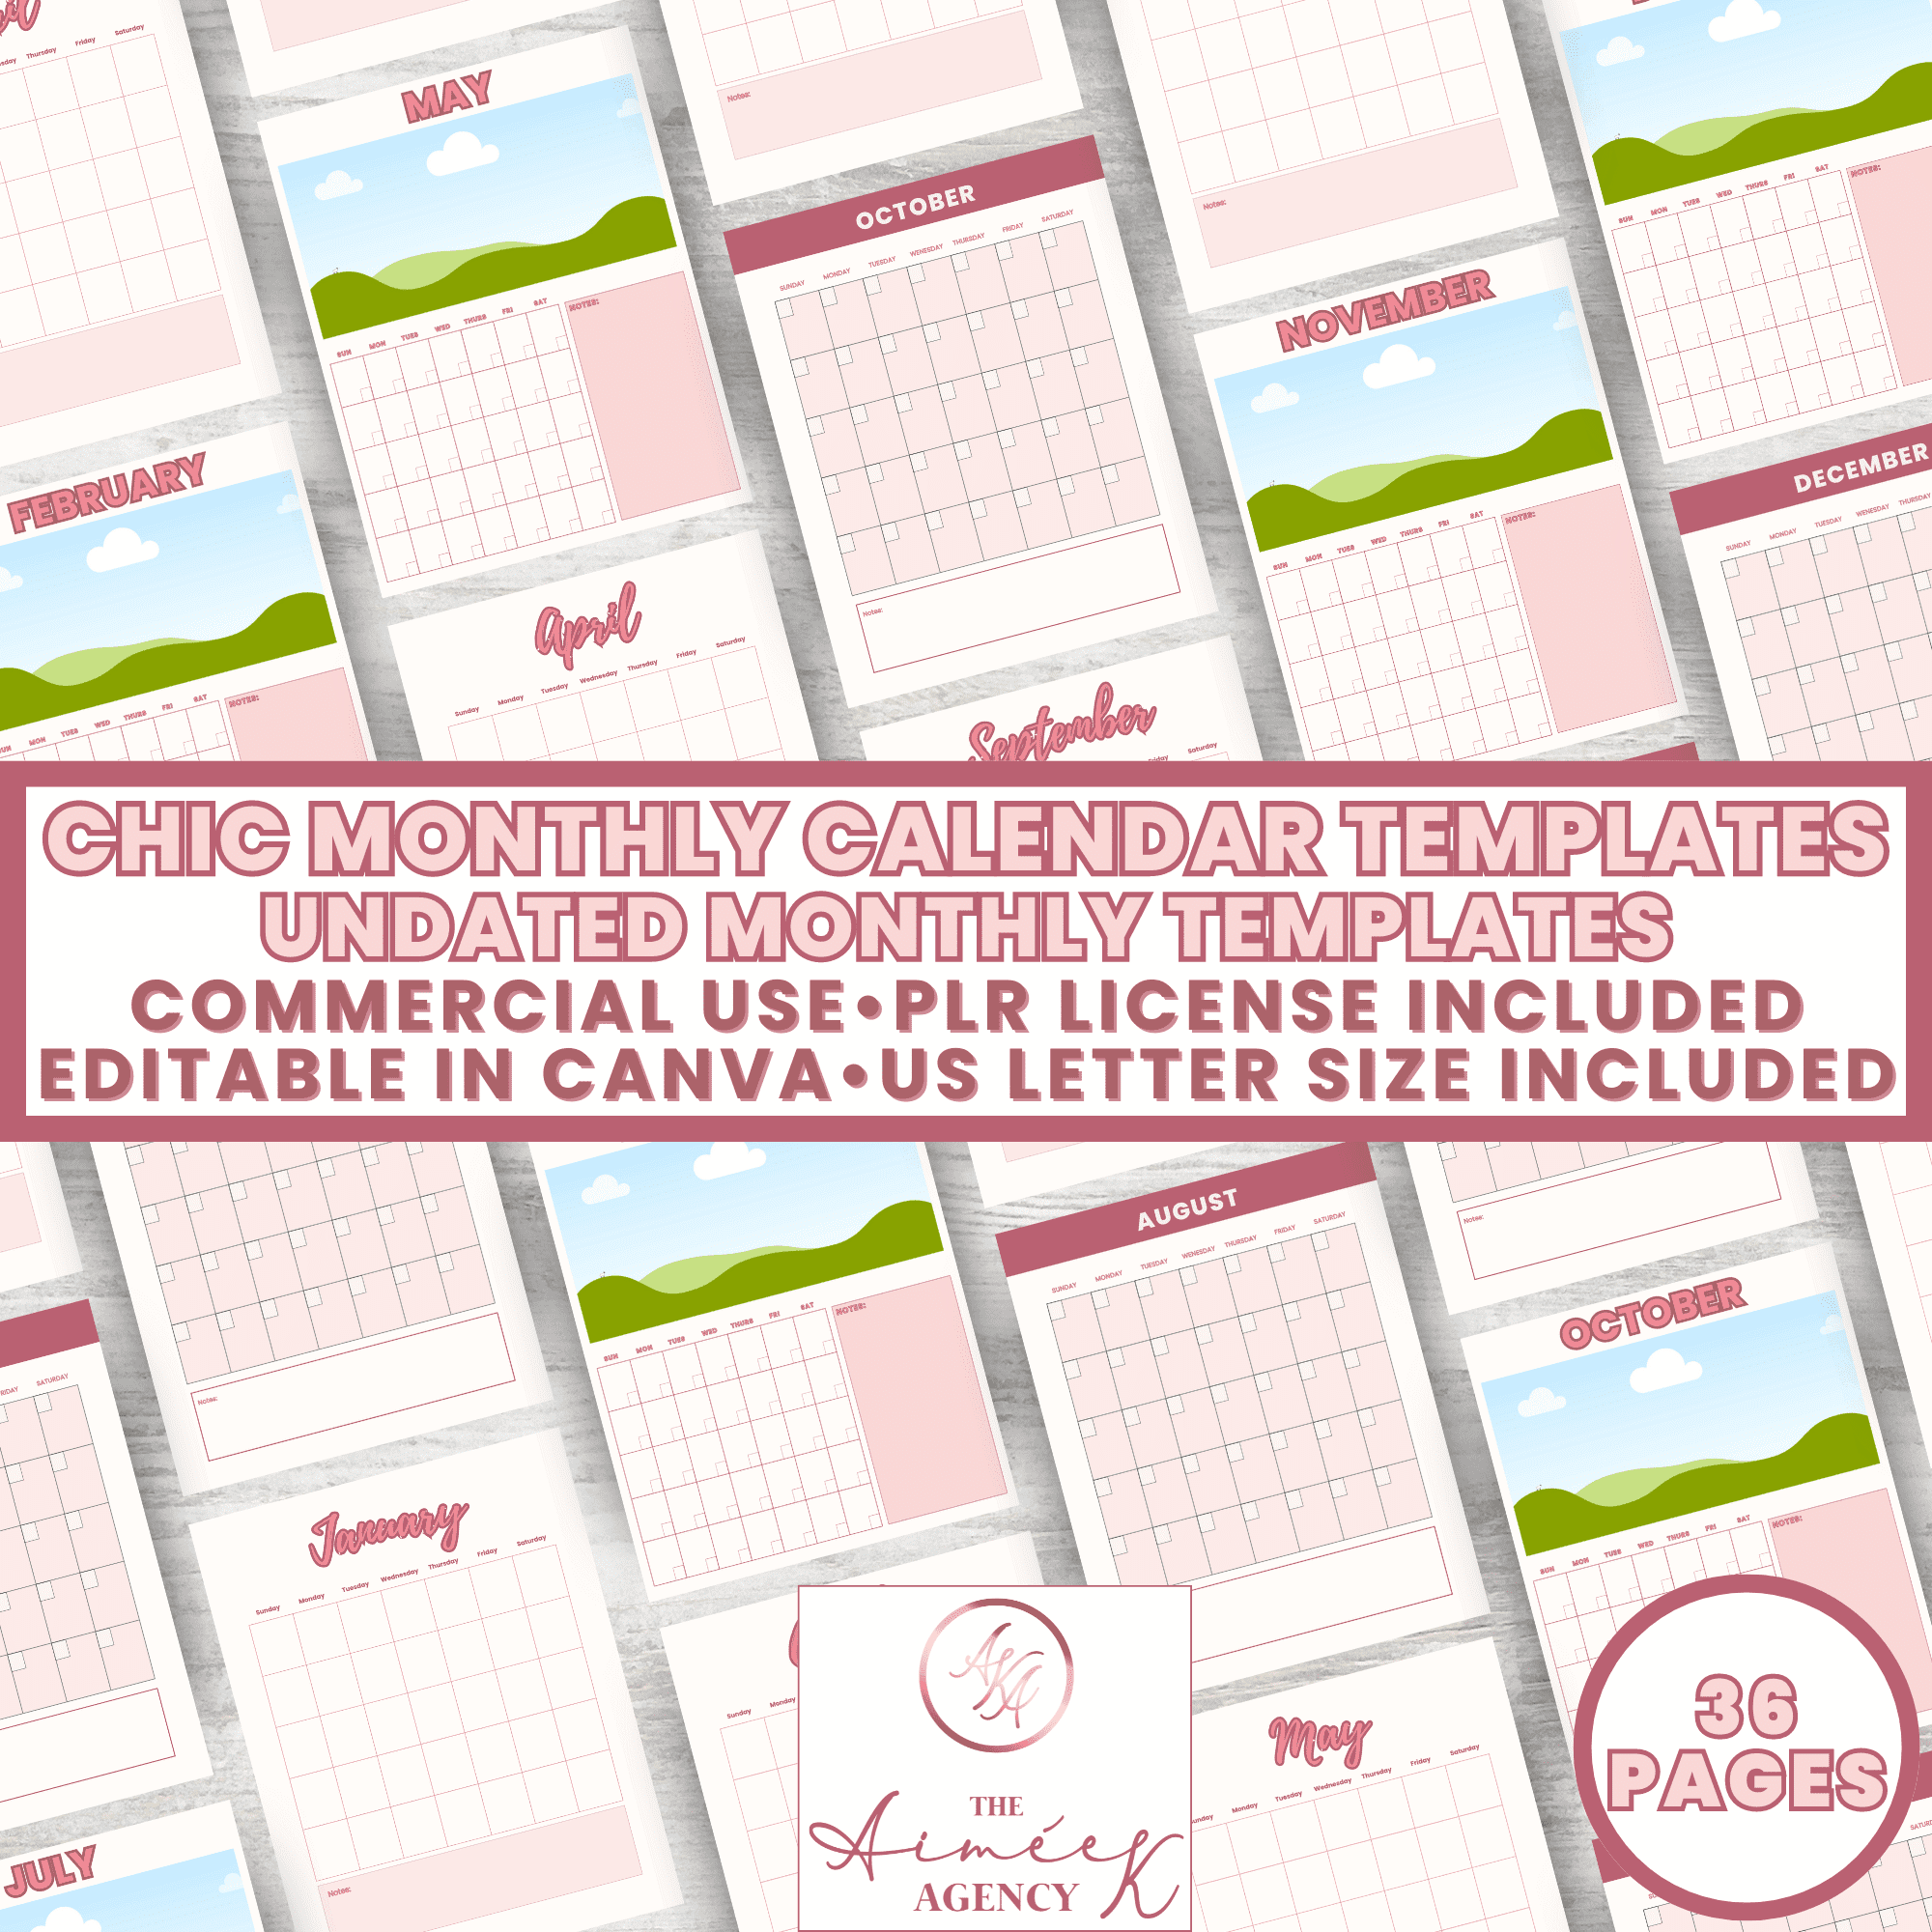 Image of chic monthly calendar templates with a title stating undated monthly templates. The templates are displayed horizontally with a pink, white, and green design. Editable in Canva and available in US Letter size.